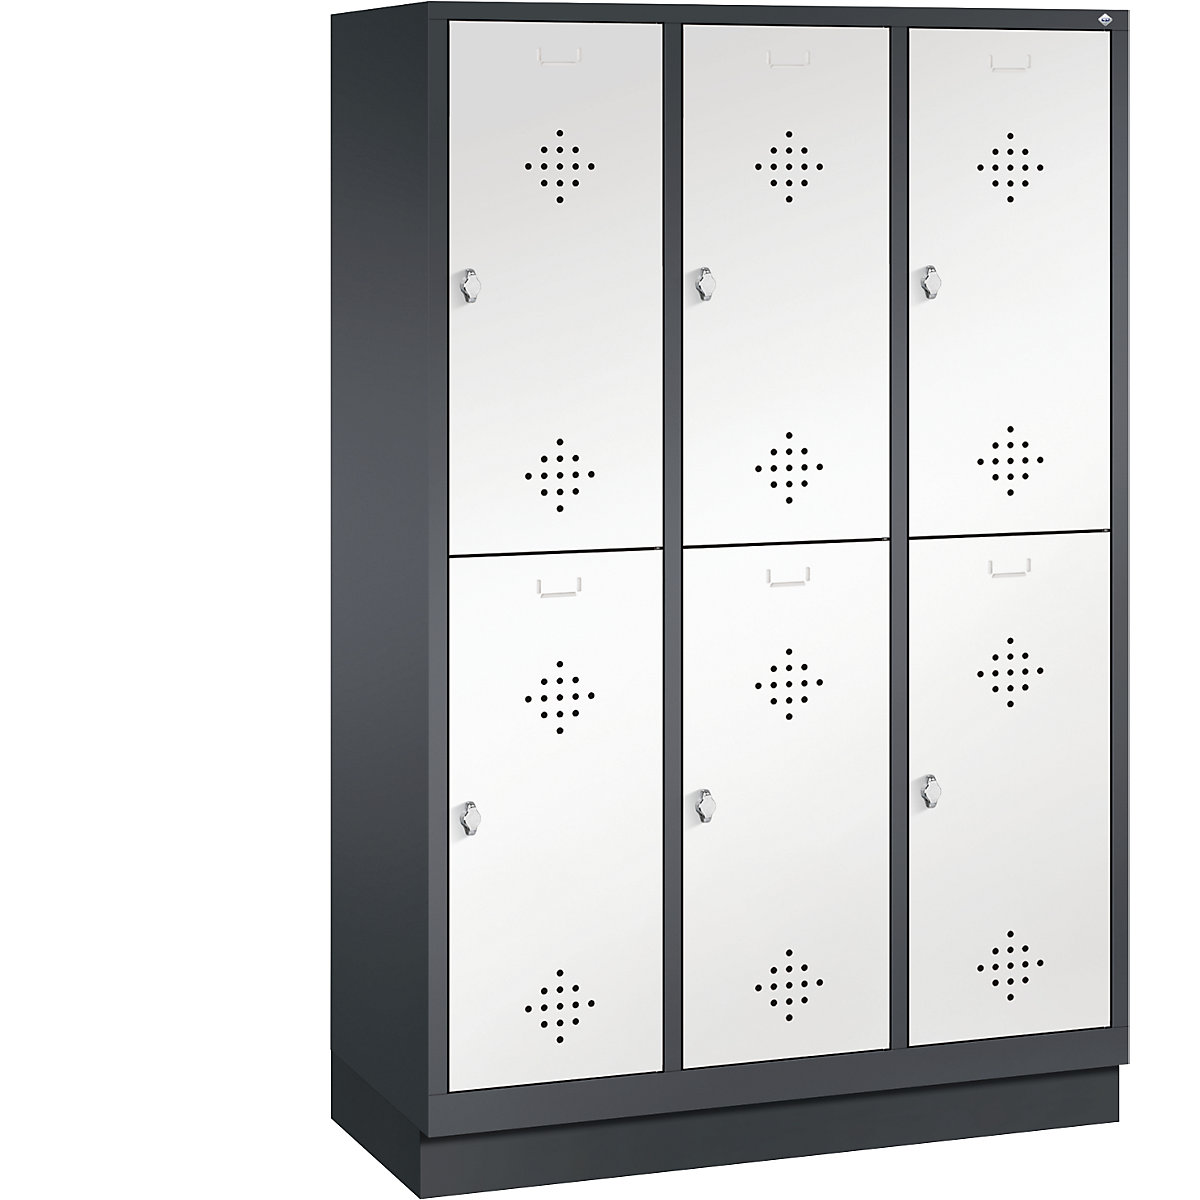 CLASSIC cloakroom locker with plinth, double tier – C+P, 3 compartments, 2 shelf compartments each, compartment width 400 mm, black grey / traffic white-9